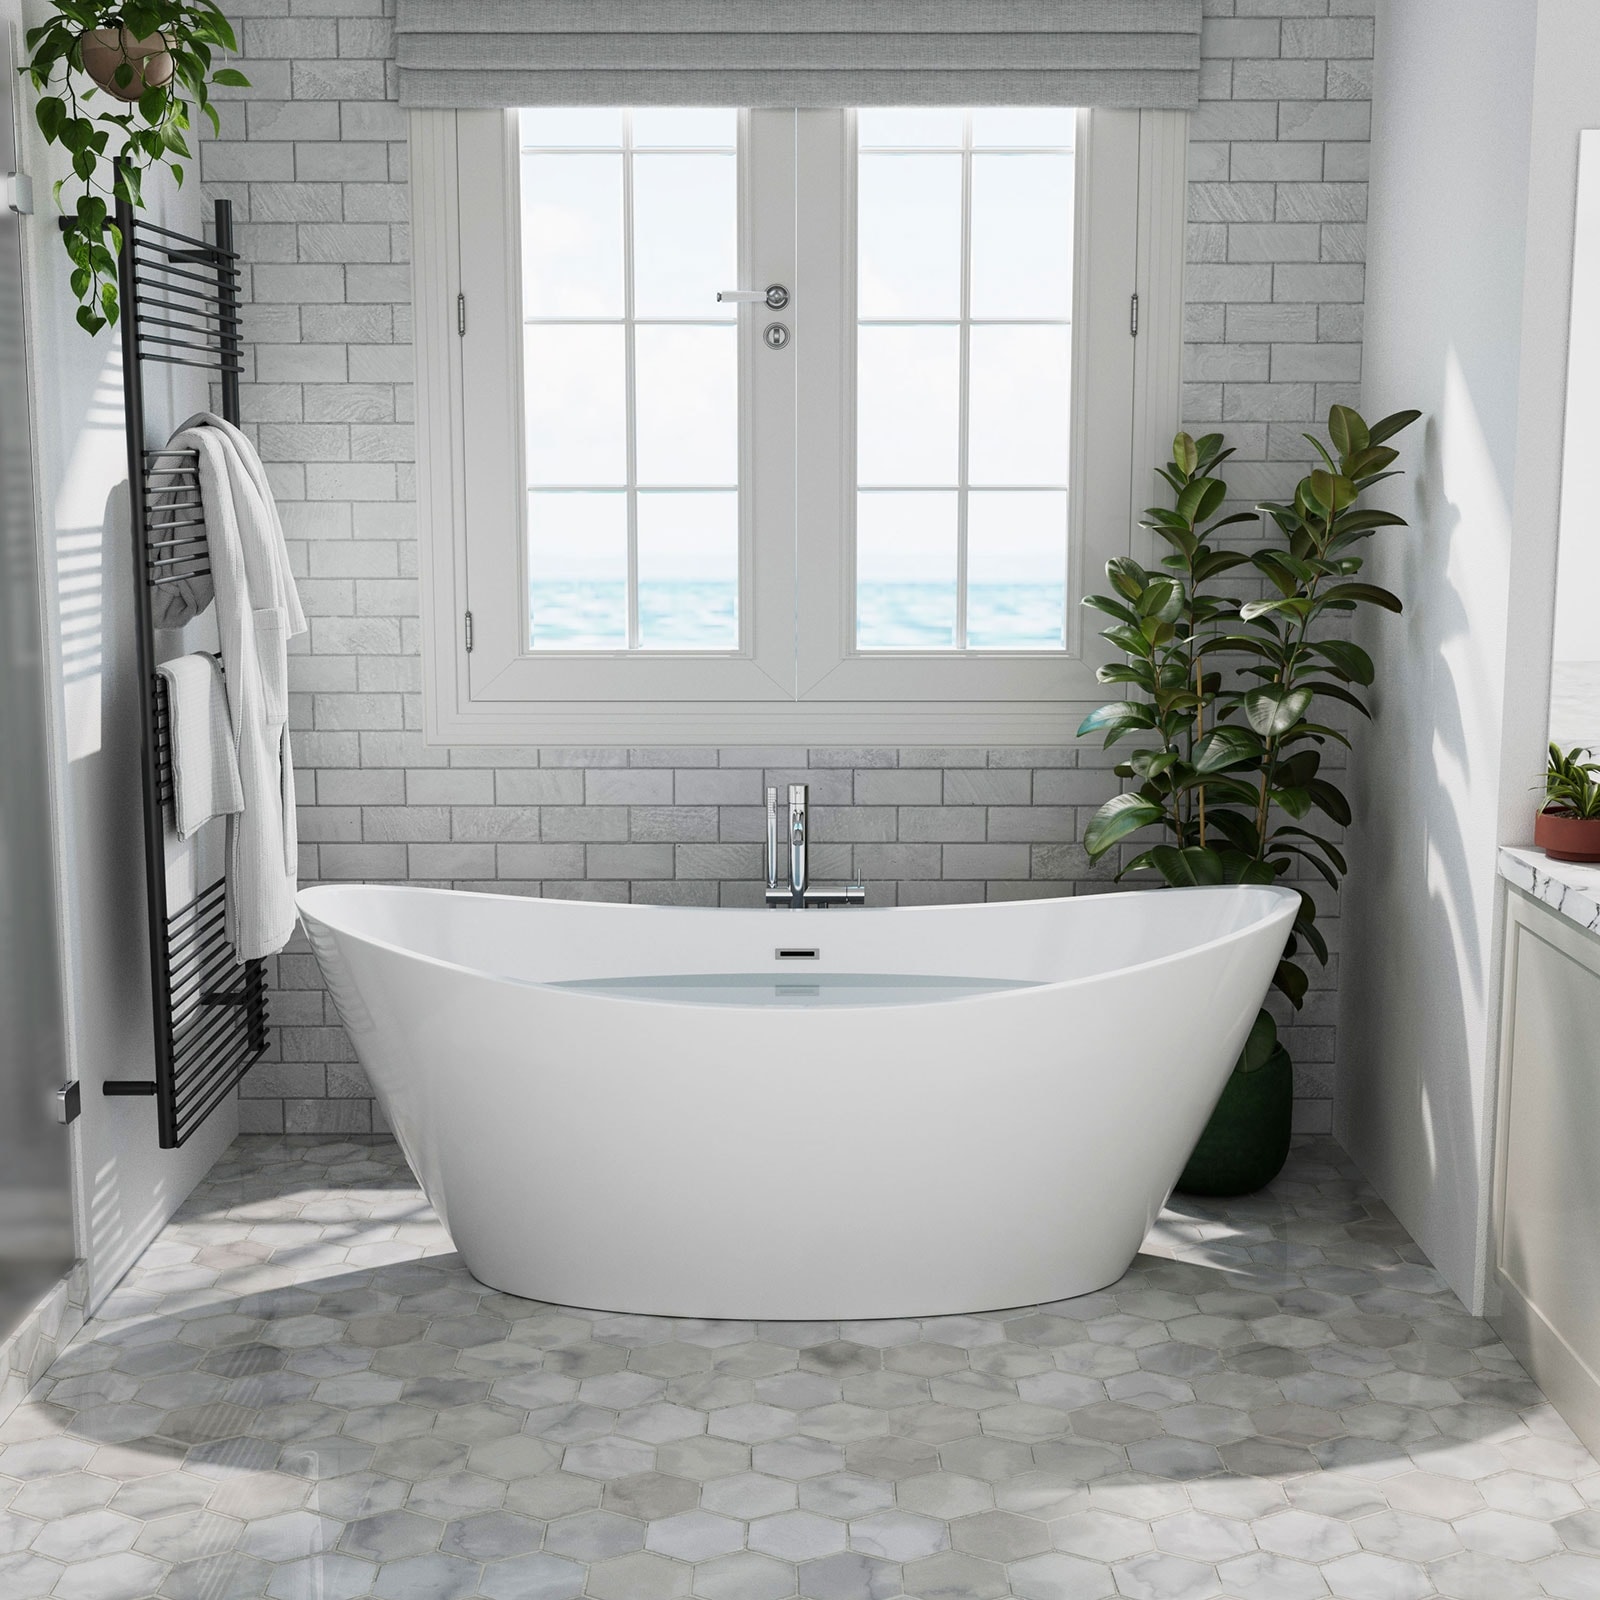 https://ak1.ostkcdn.com/images/products/is/images/direct/5bf7764fc4b49bd49beae5ae5598ea7a3549d1be/Empava-67-in-Luxury-Freestanding-Bathtub-Acrylic-Soaking-SPA-Tubs.jpg